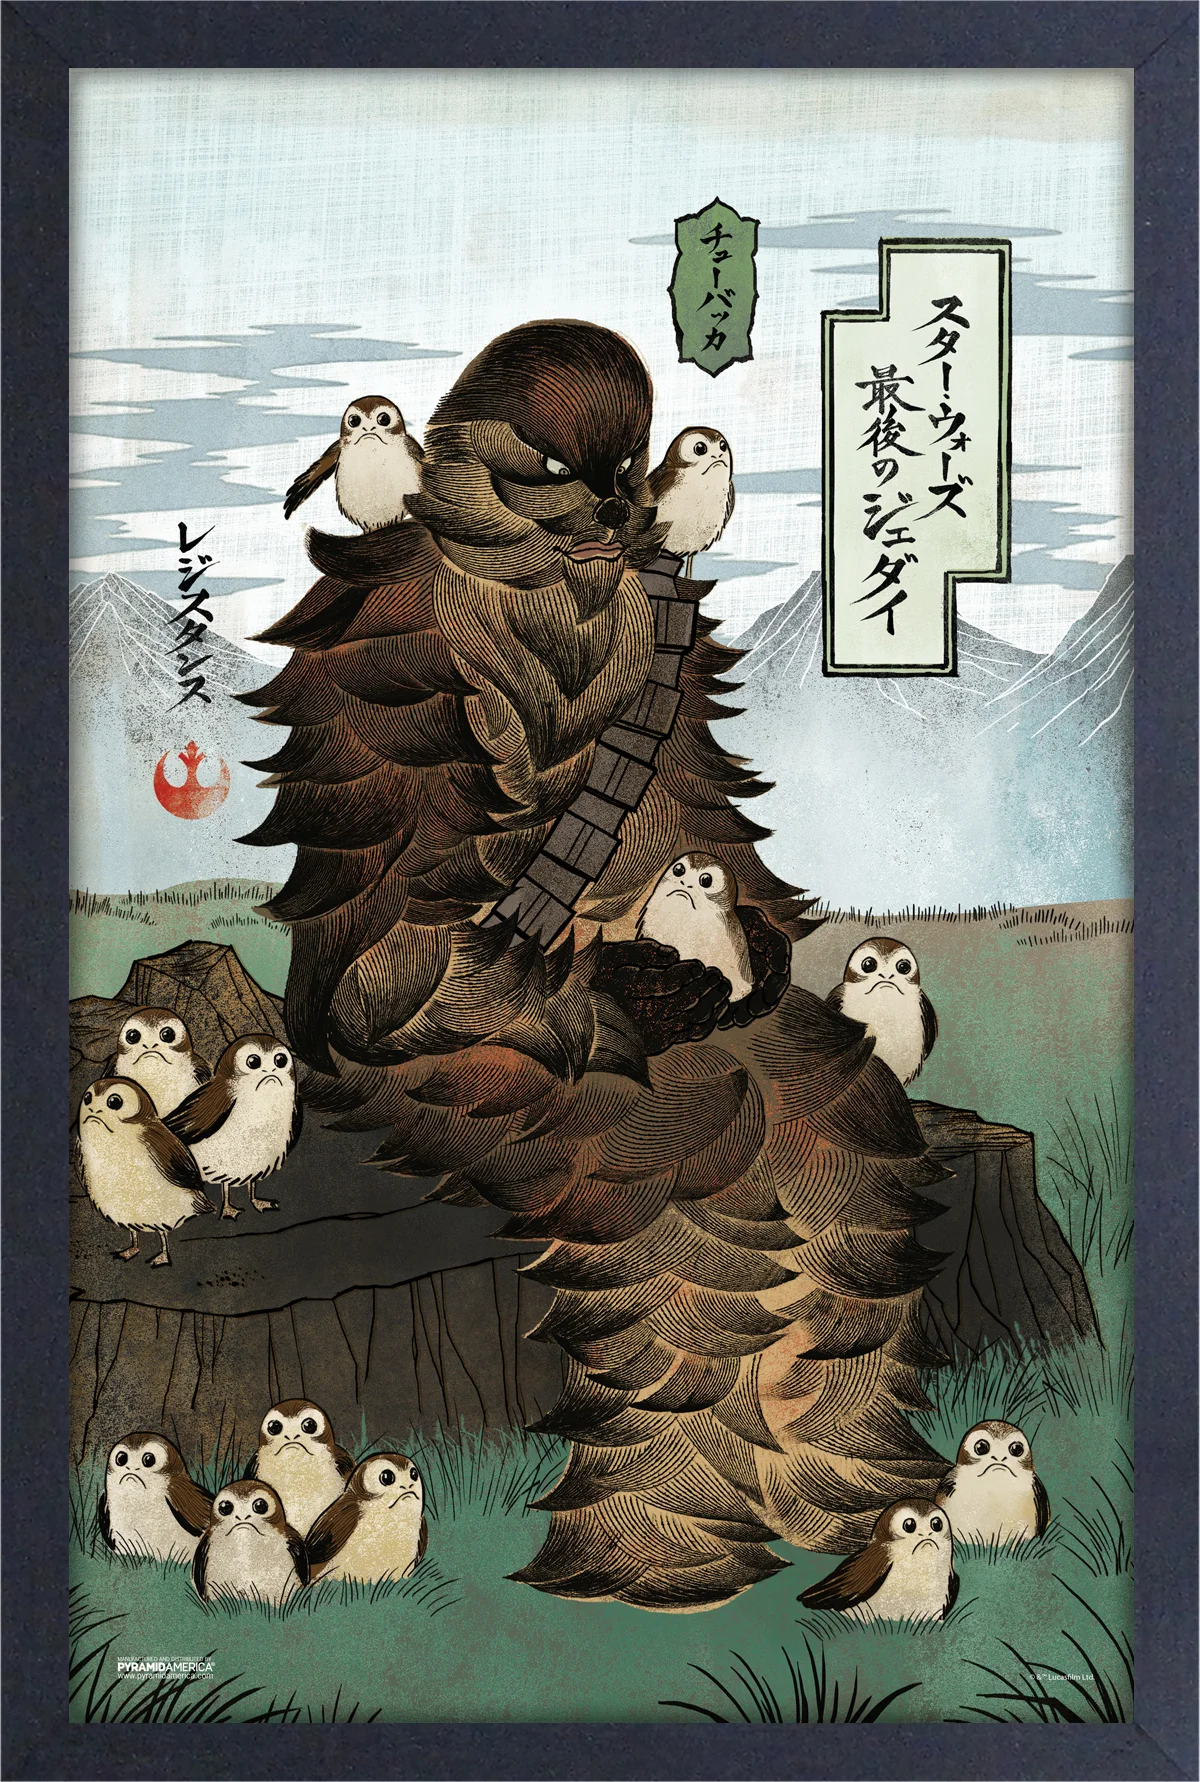 Star Wars - Chewbacca (Japanese Style) (11"x17" Gel-Coat) (Order in multiples of 6, mix and match styles)